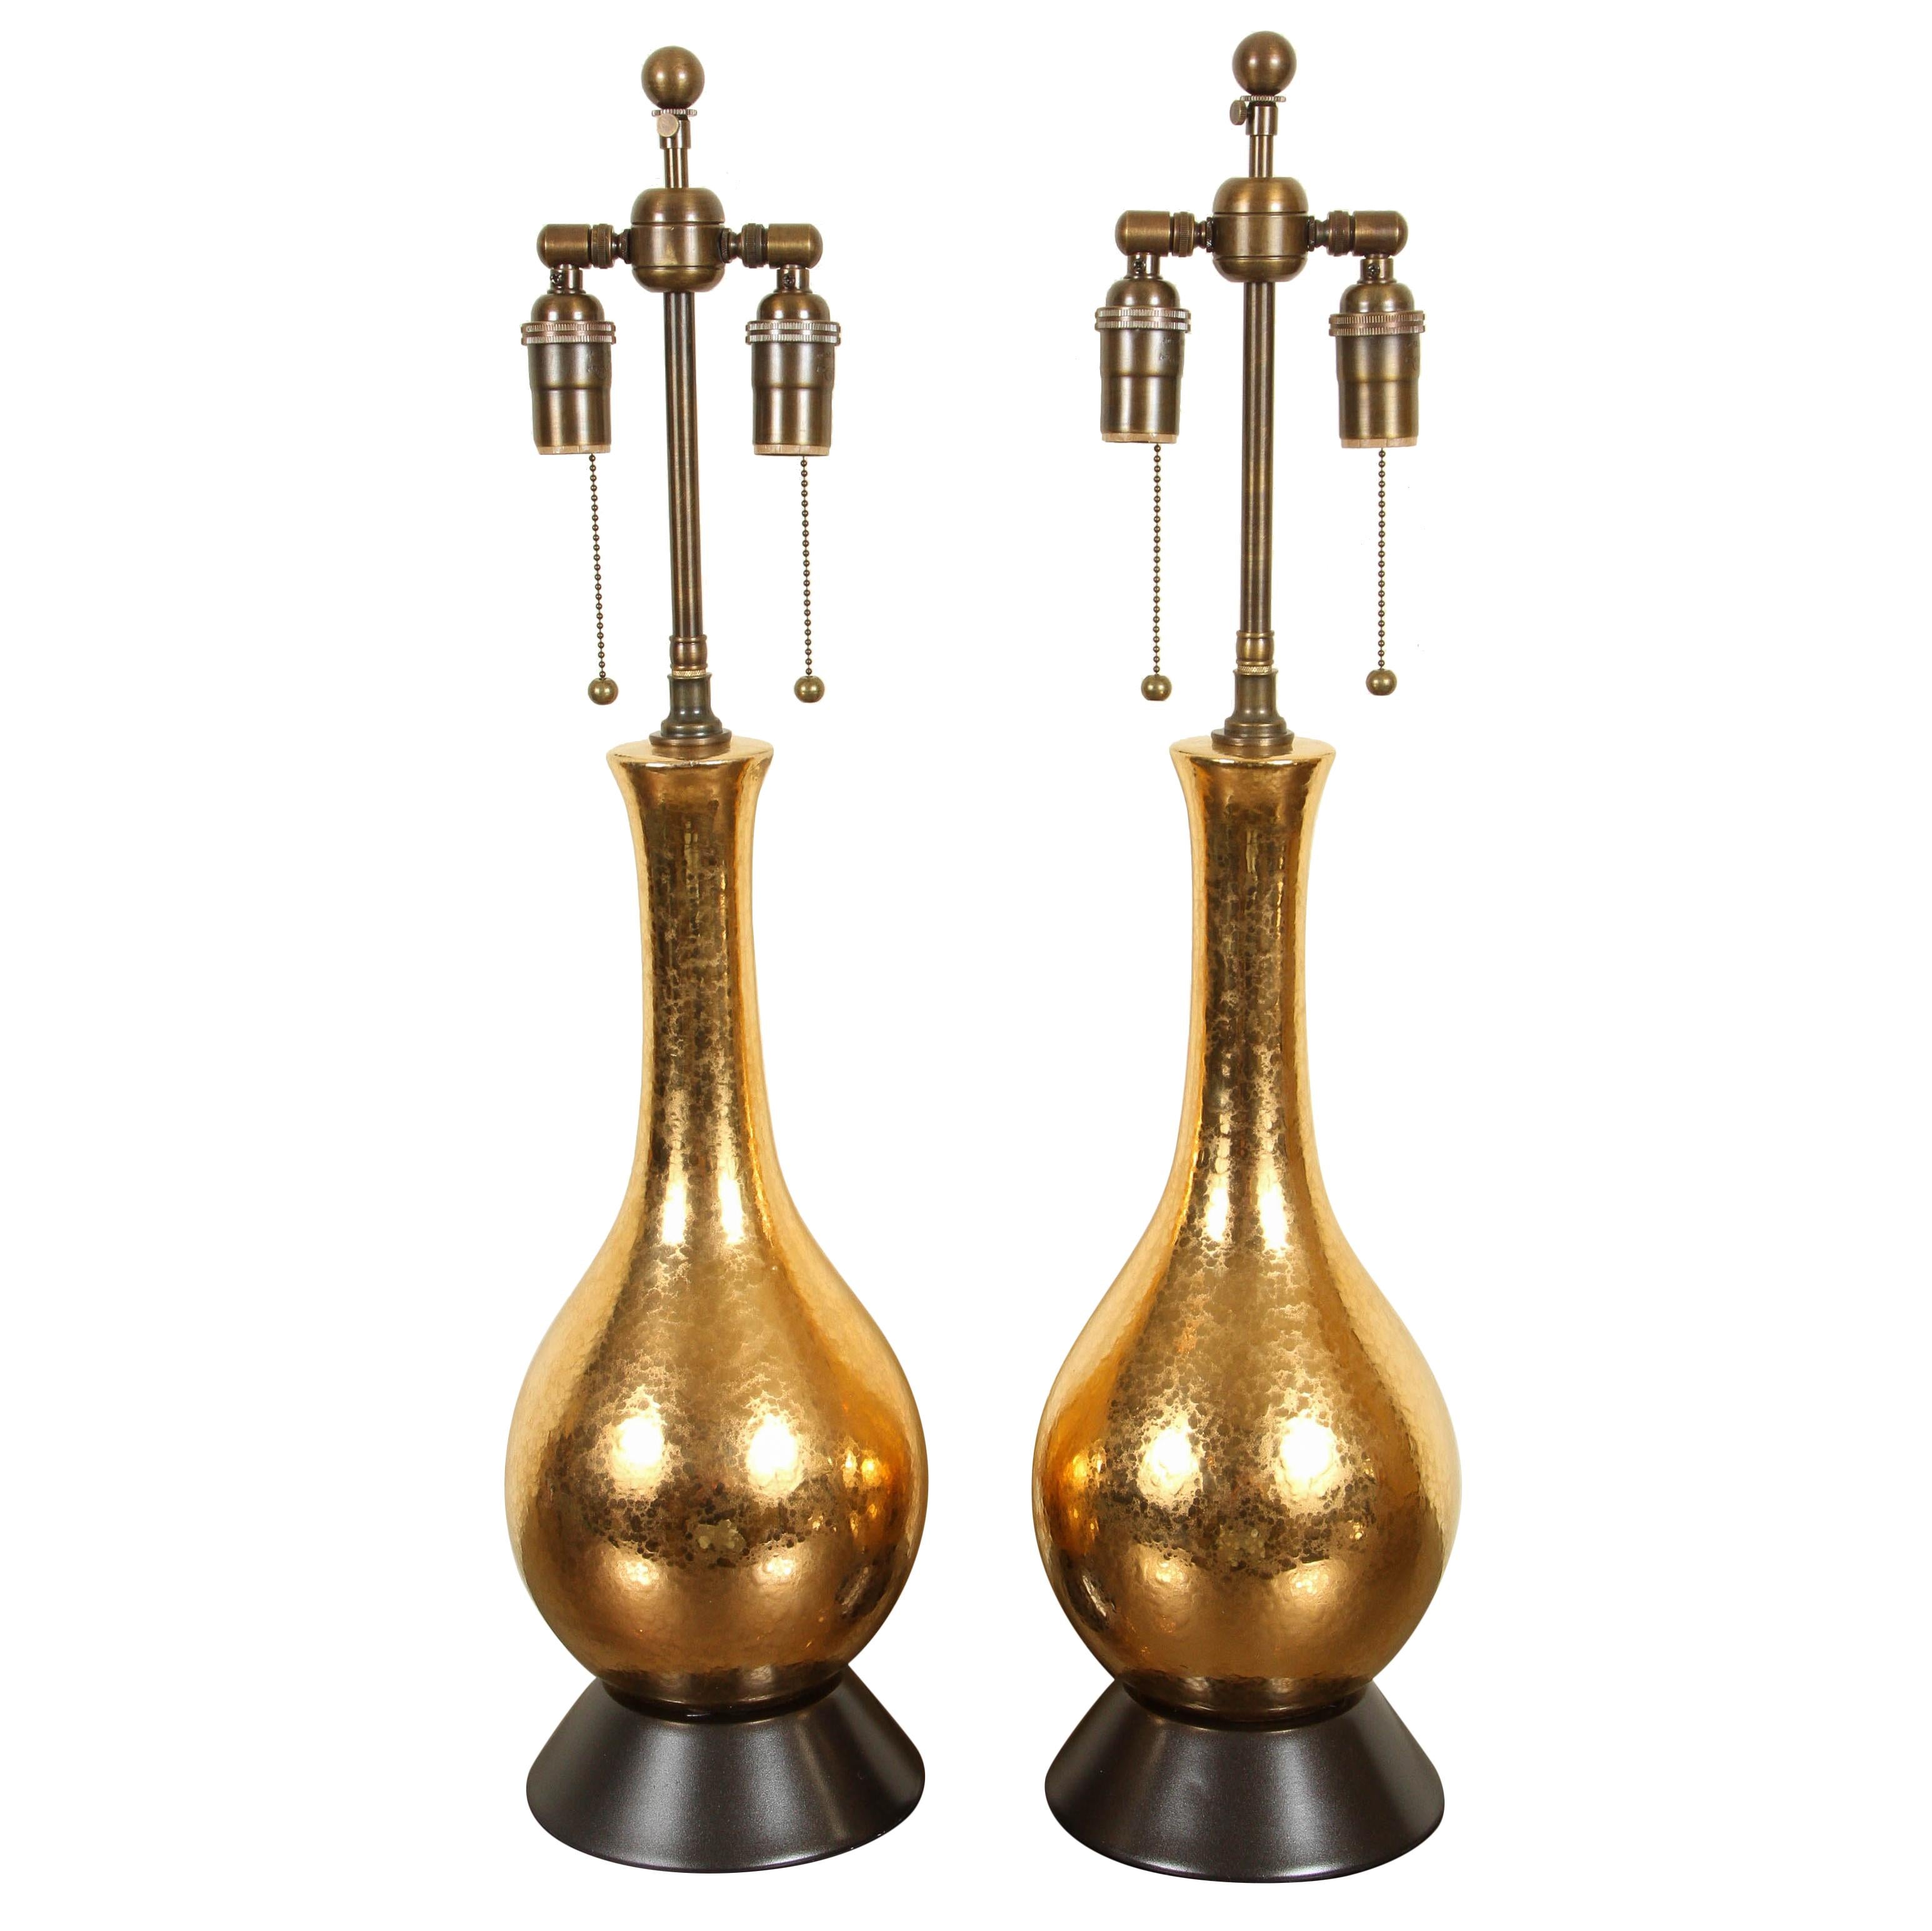 Pair of Gold Crackled Glazed Lamps